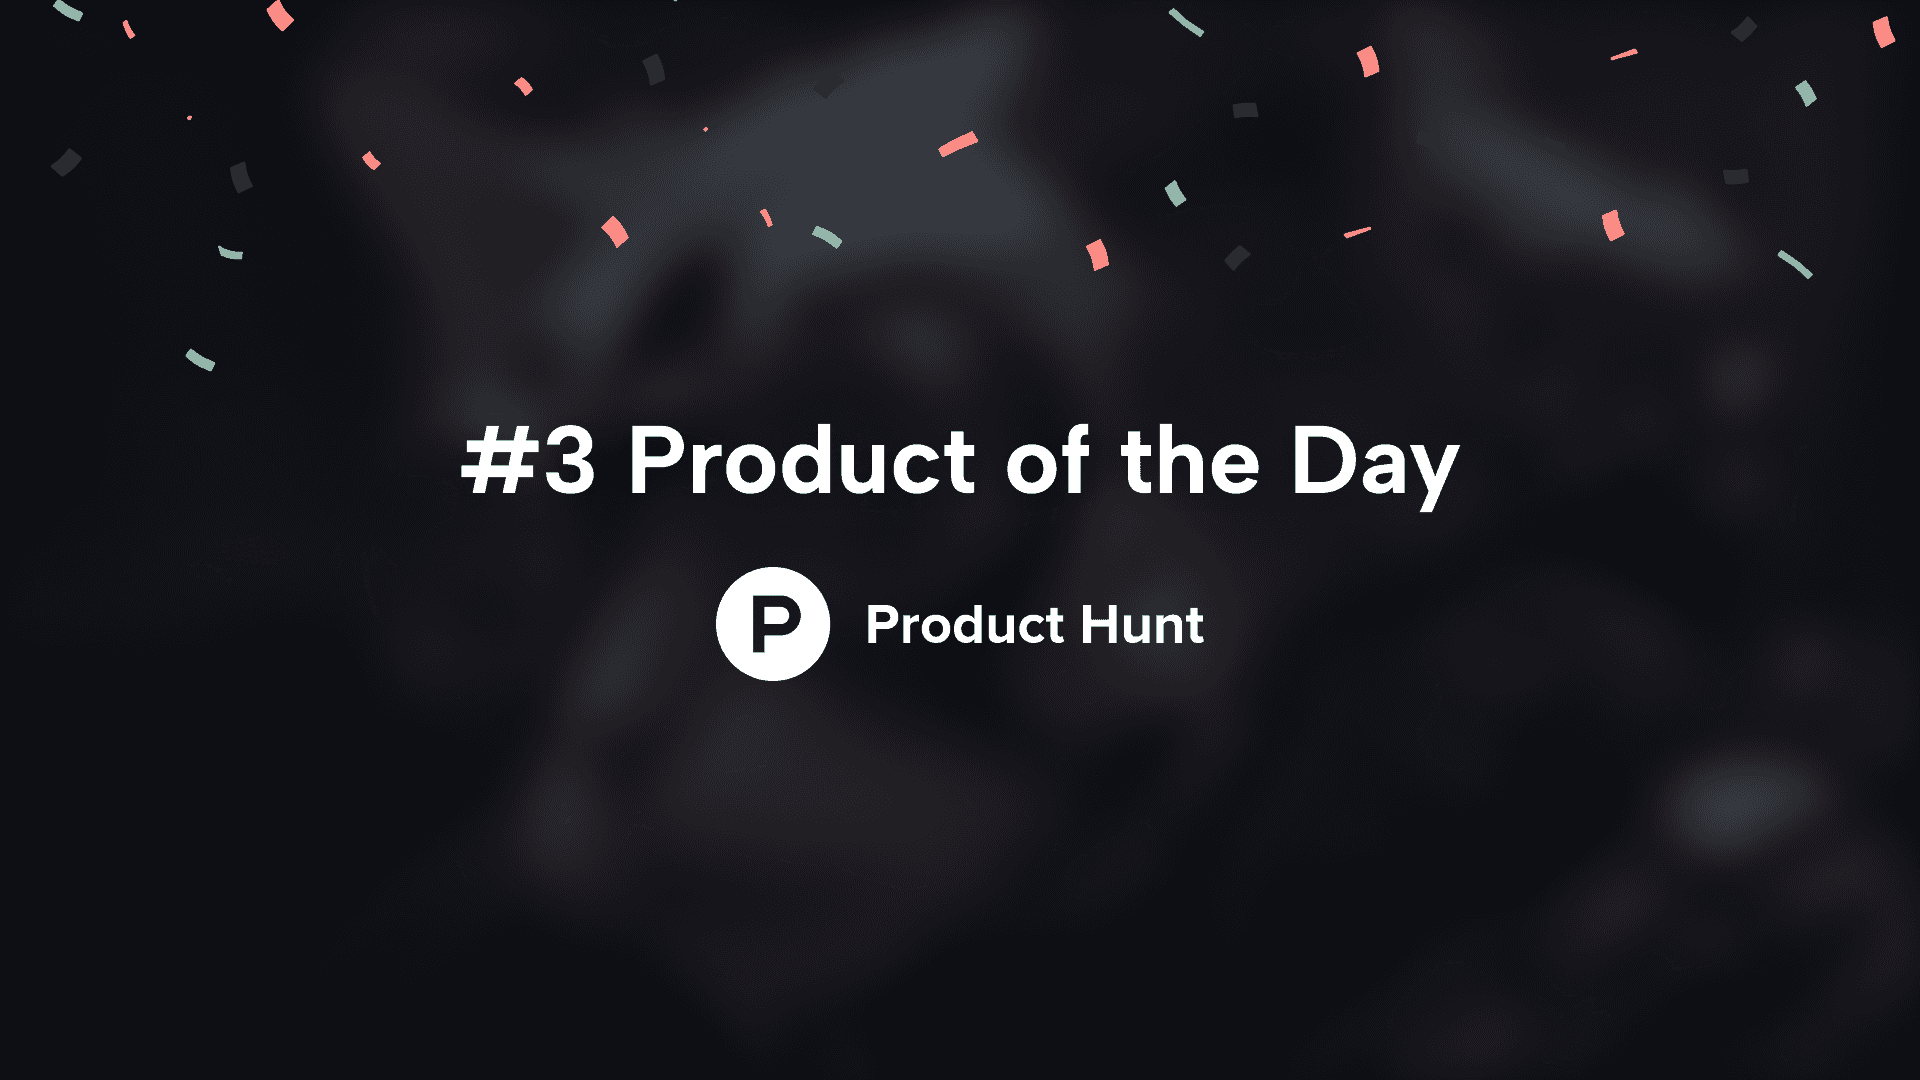 Drope.me is 3# Product of the Day on Product Hunt! 